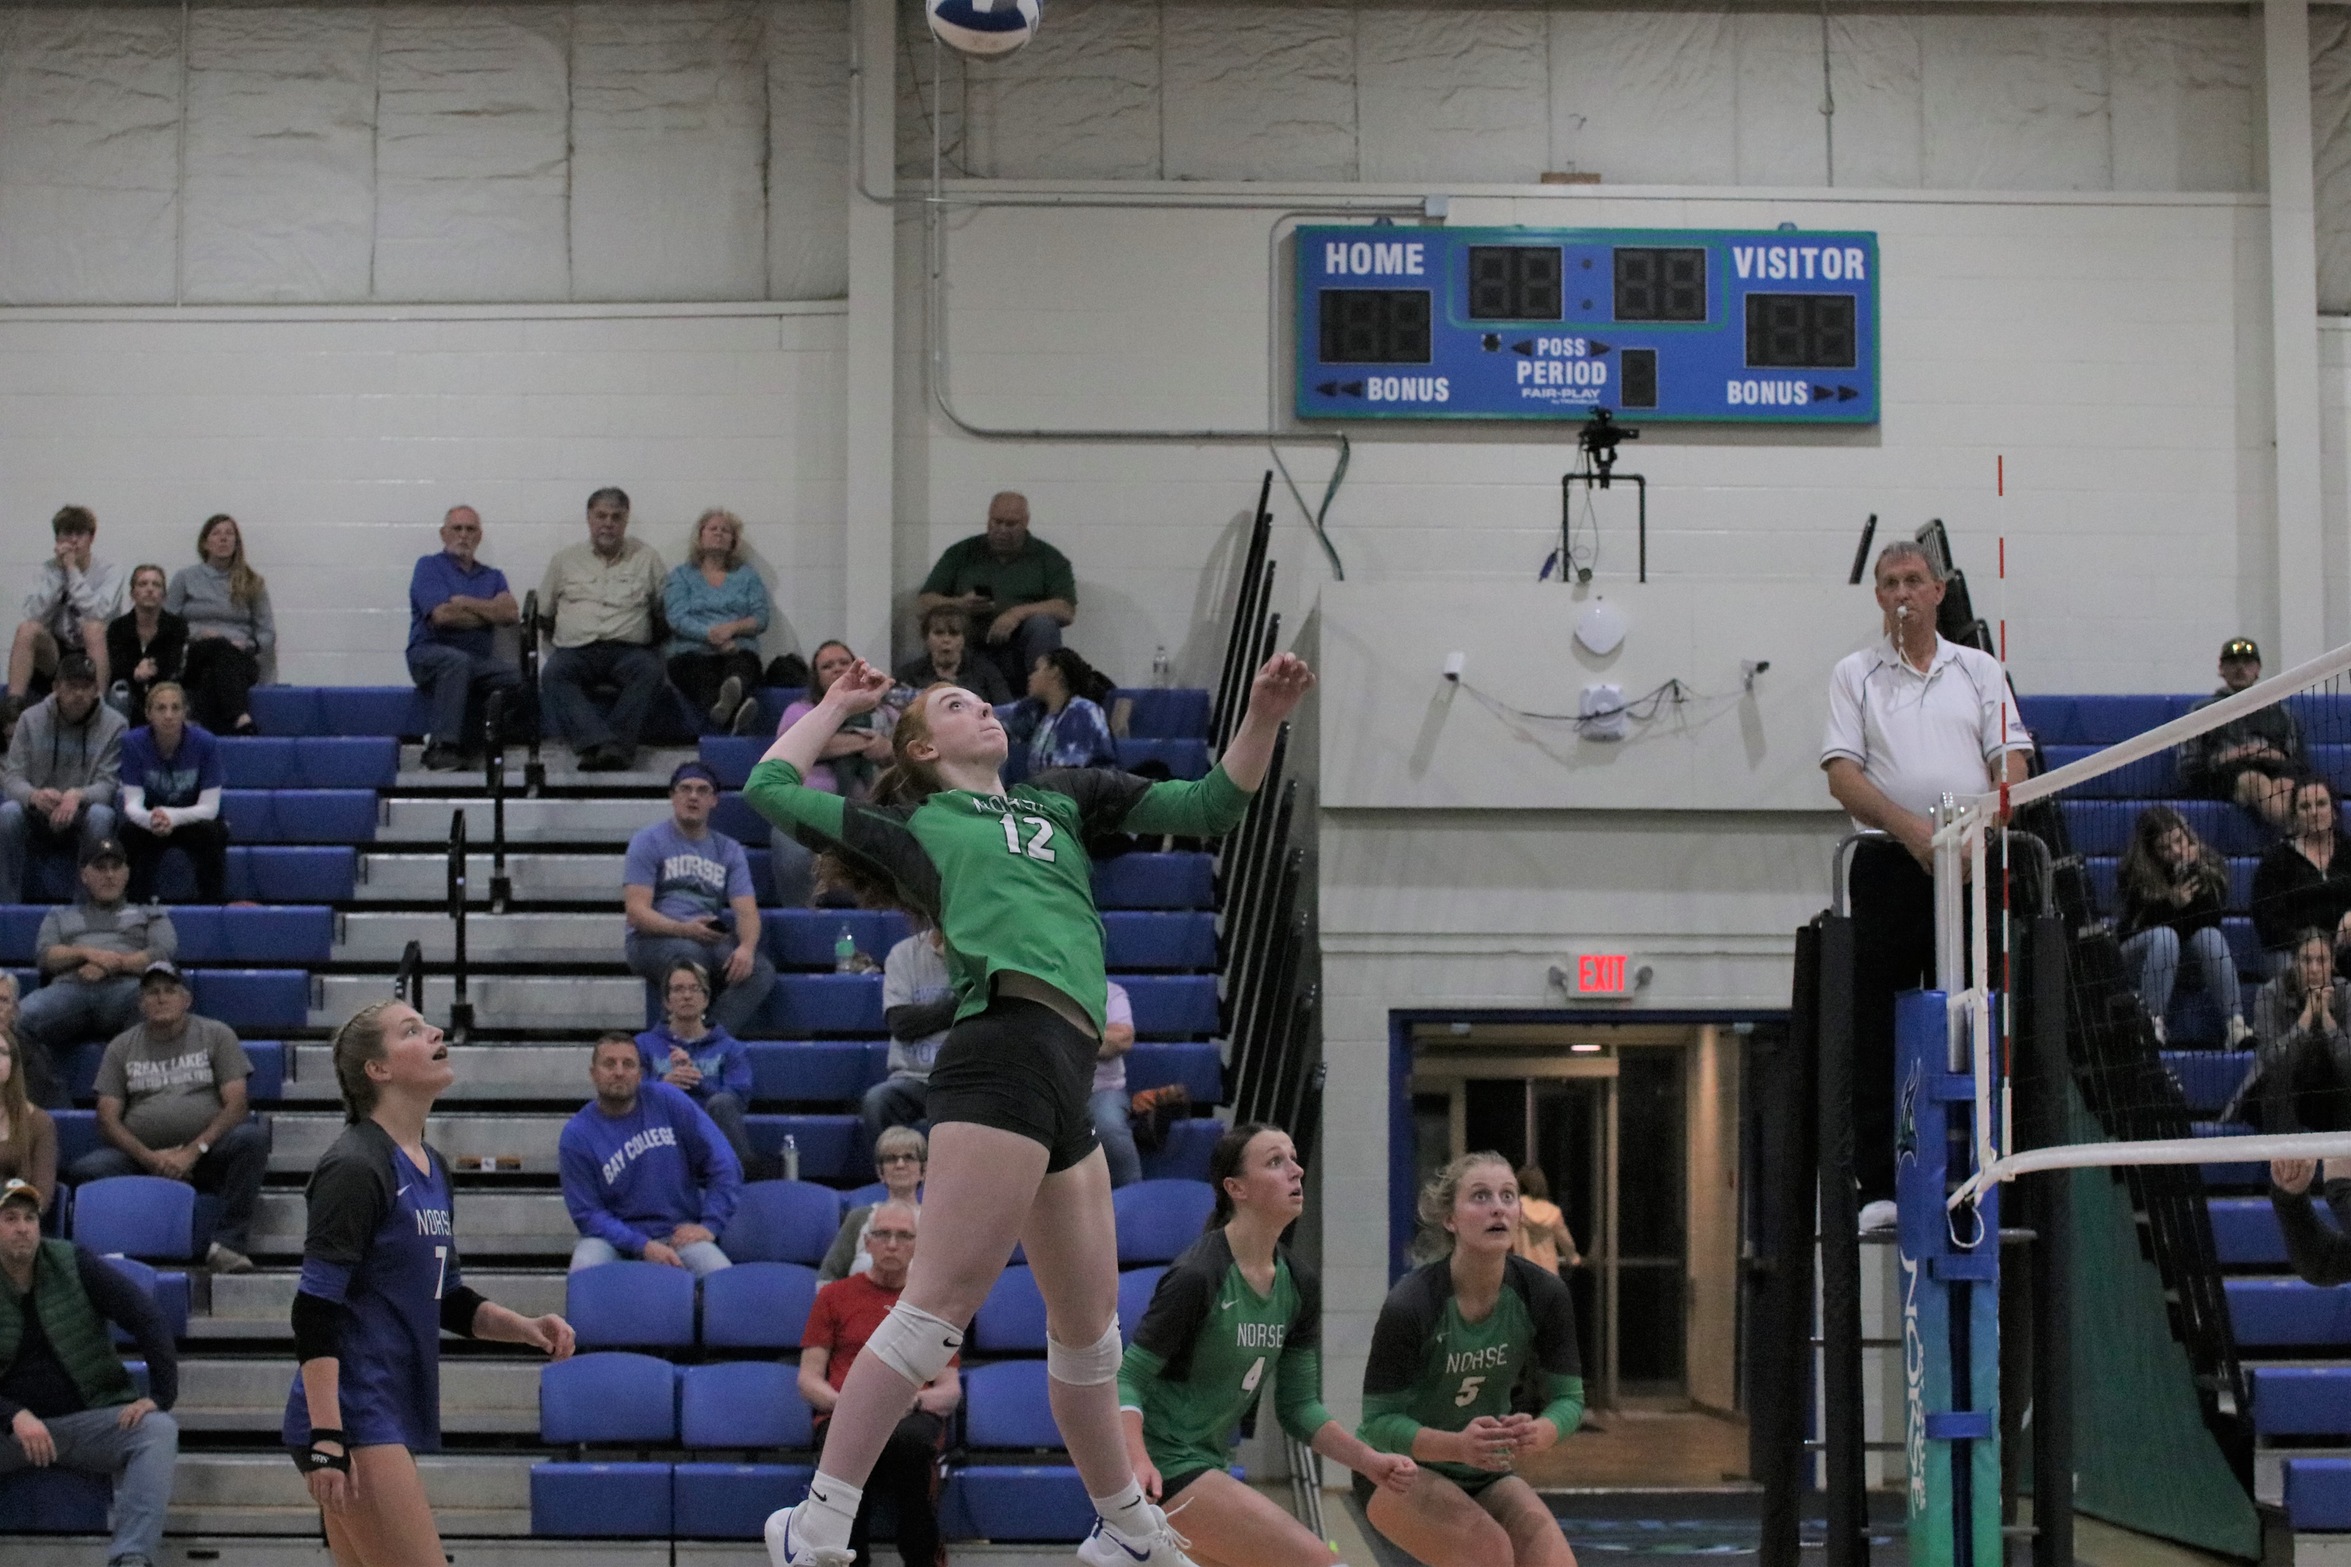 Kylee Tadisch in the air, about to swing for a kill as her teammates look on